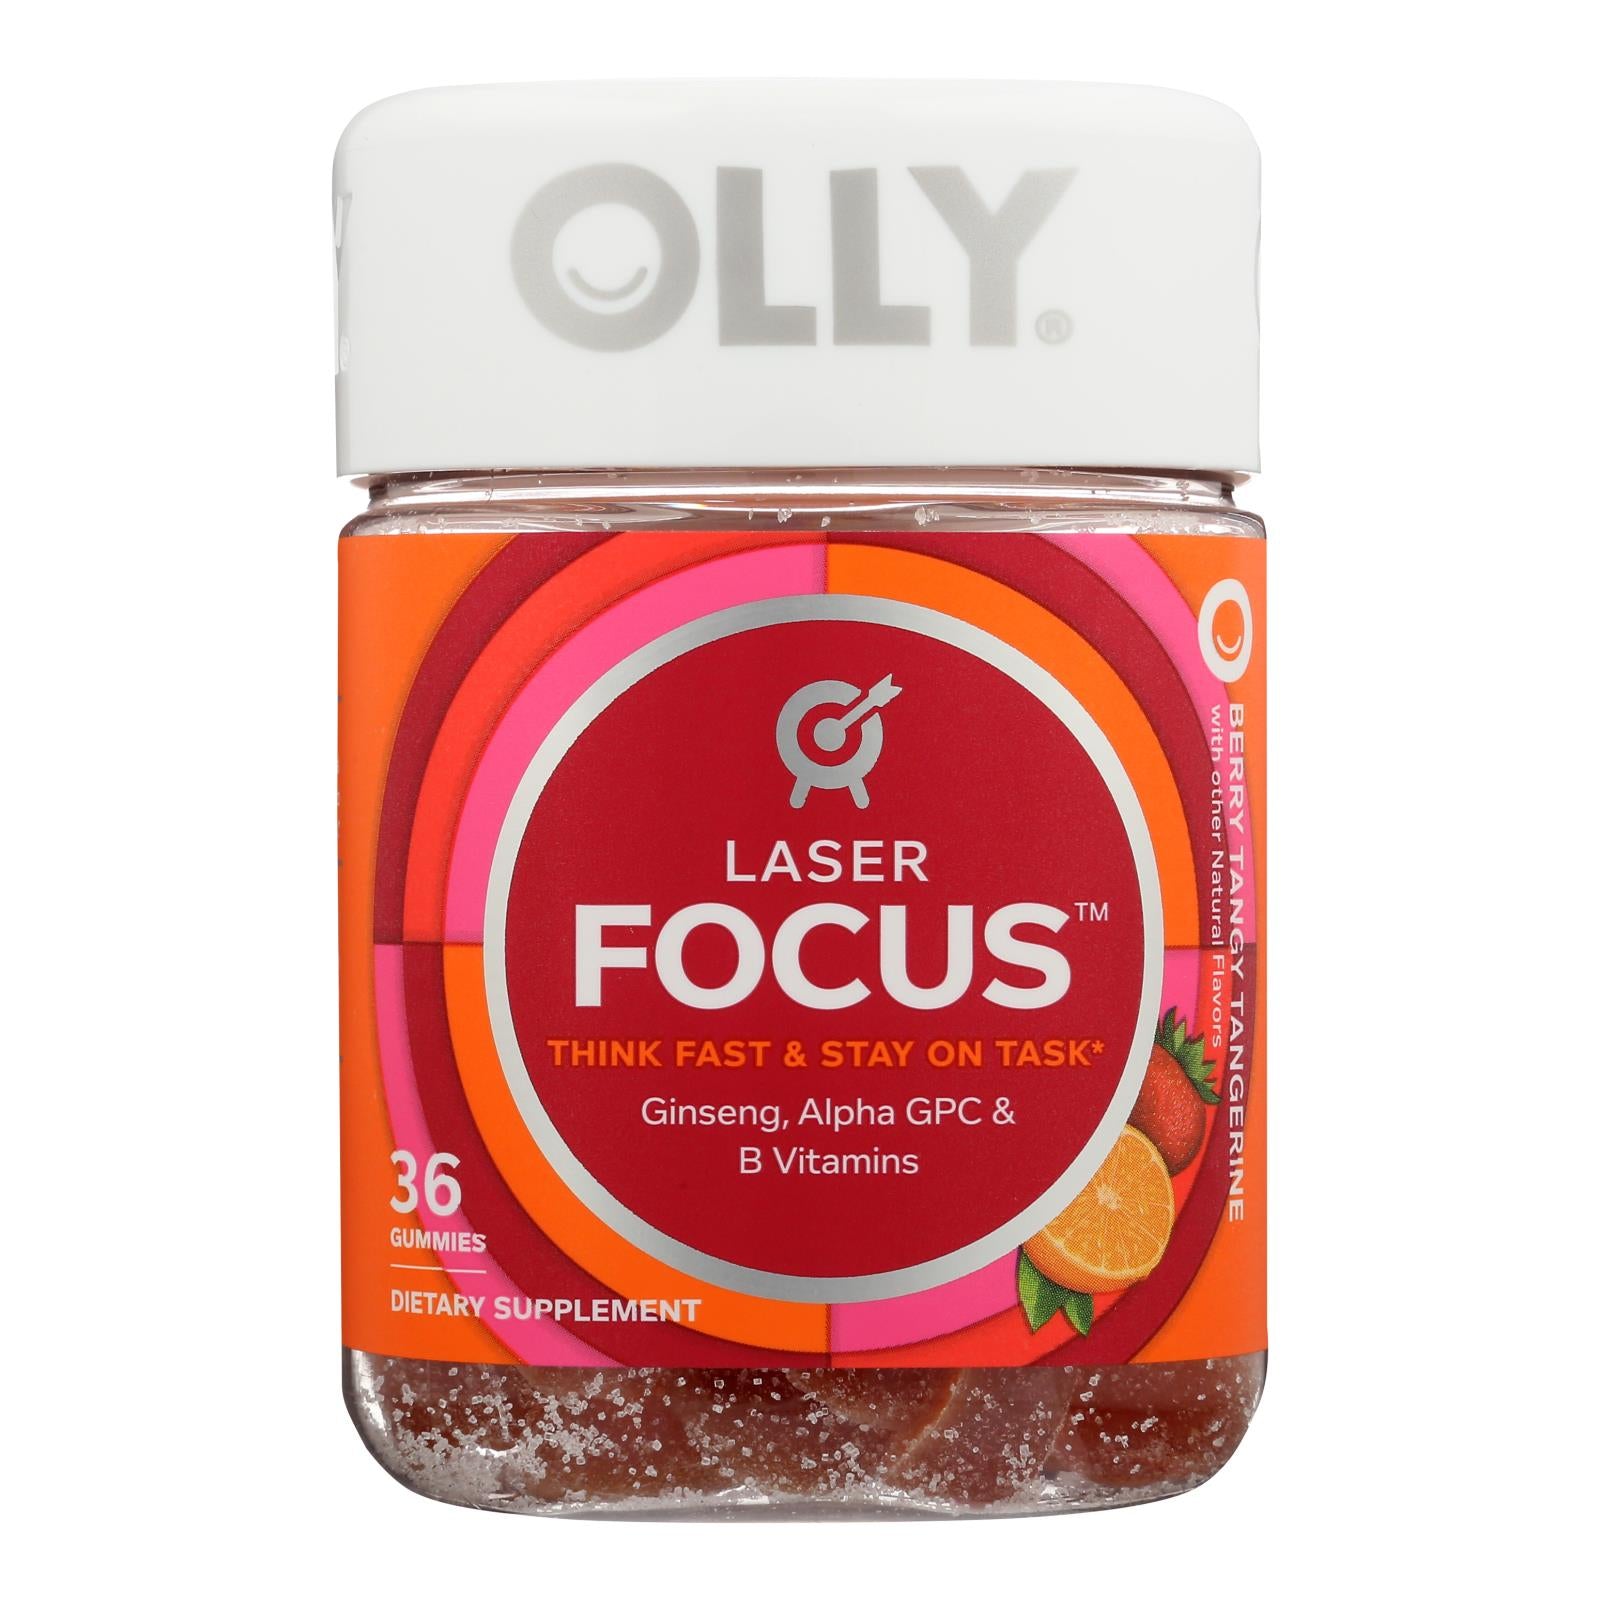 Olly - Lasor Focus Berry Tngy Tang - 1 Each-36 Ct